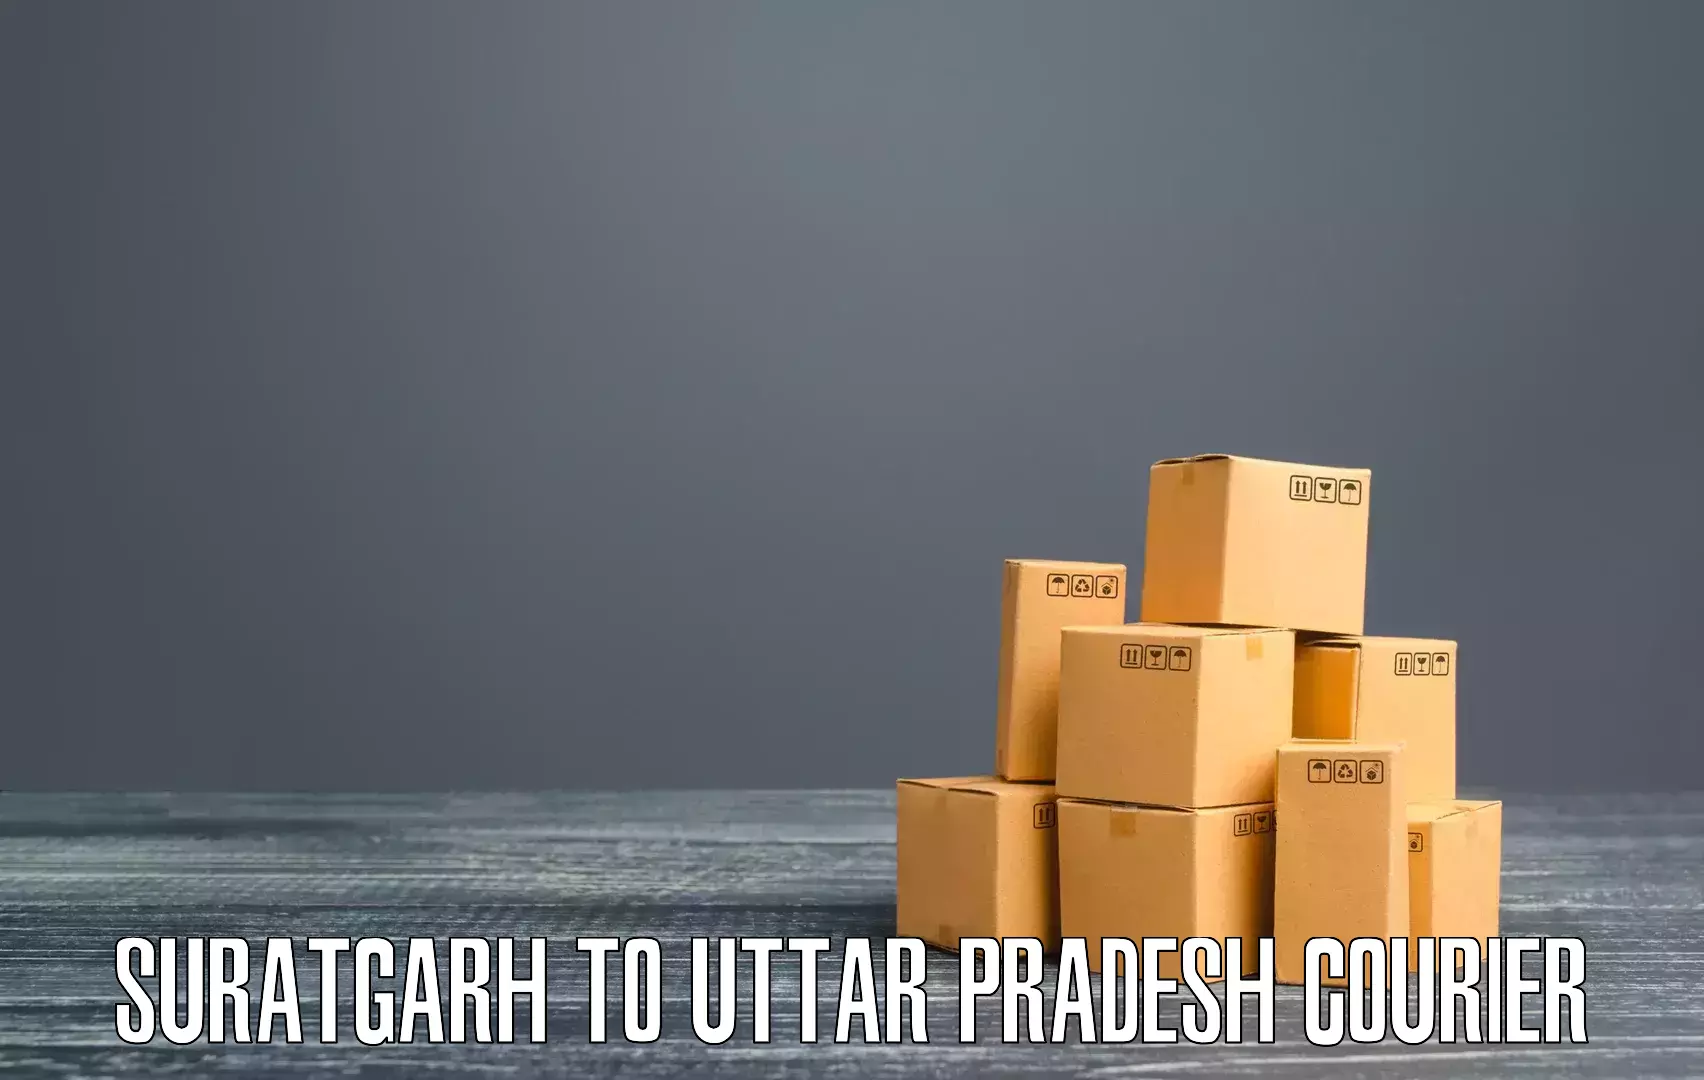 Courier app Suratgarh to Ayodhya